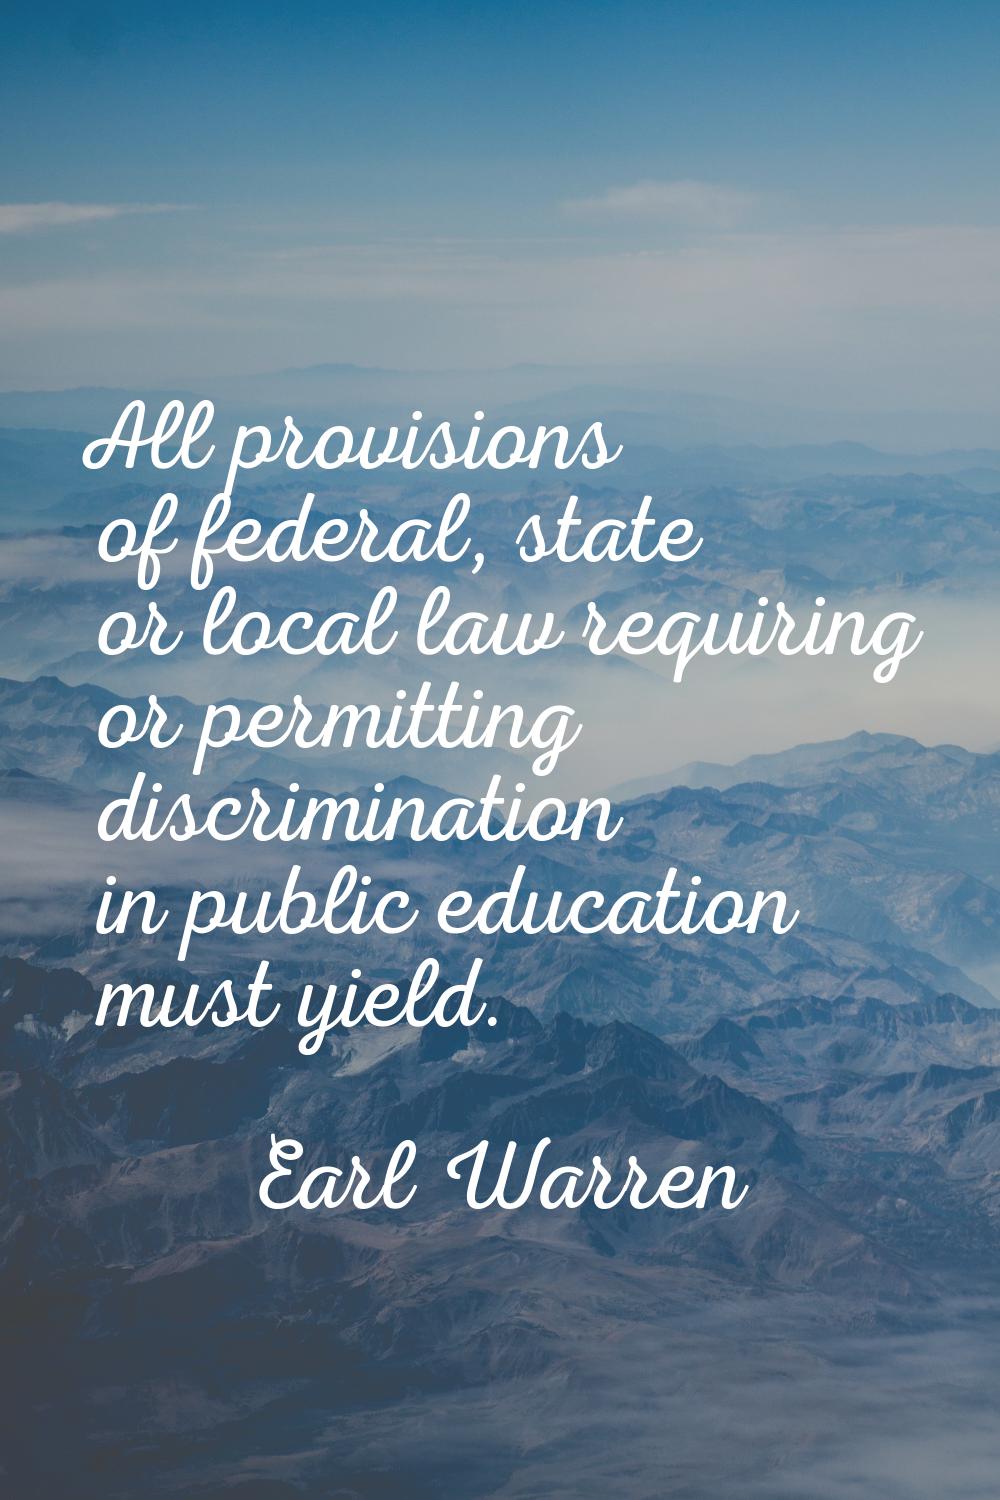 All provisions of federal, state or local law requiring or permitting discrimination in public educ